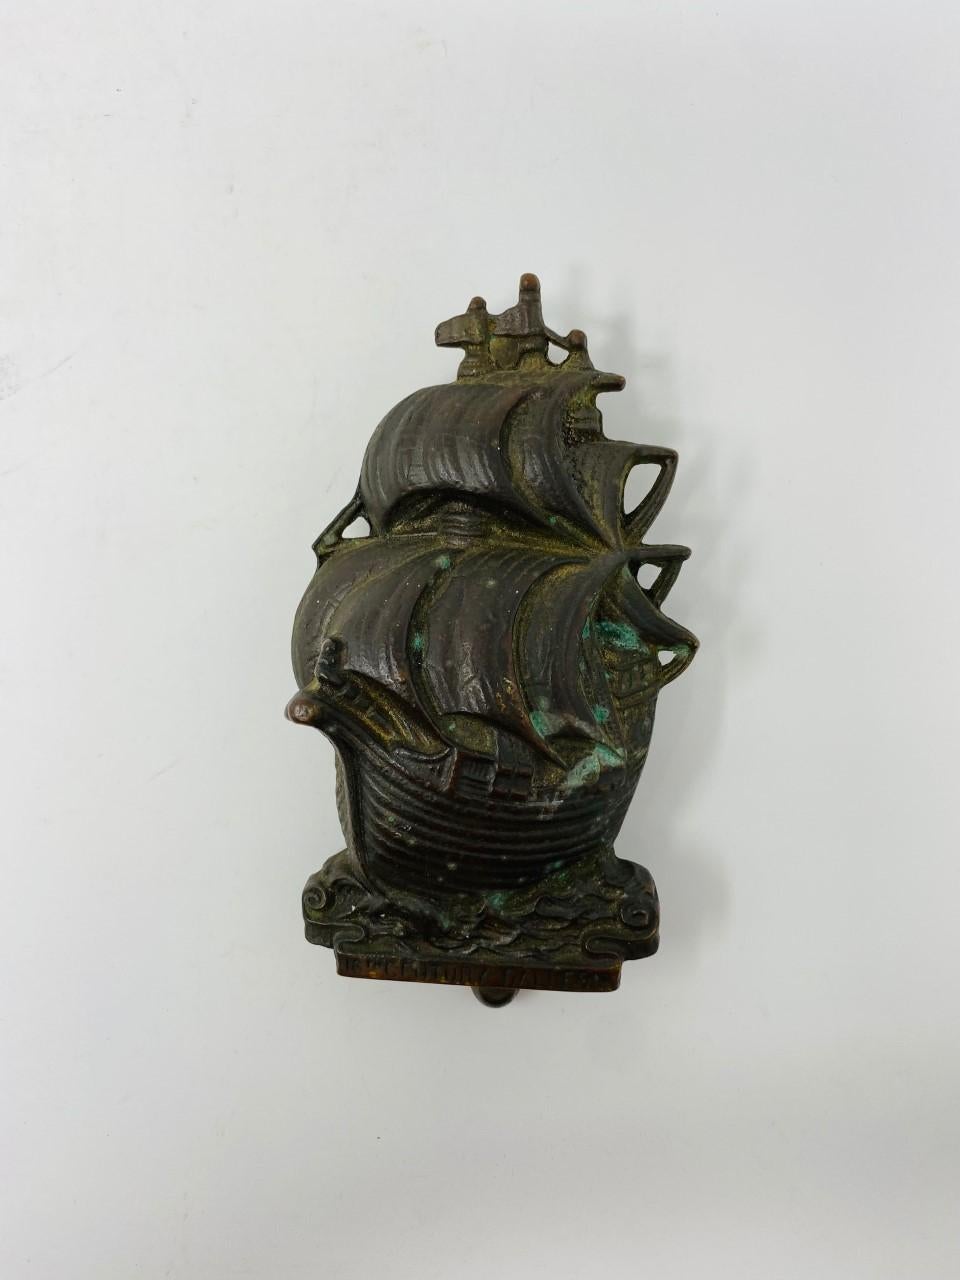 Heavy vintage solid brass 16th century Gallion design door knocker. Antique piece from the 1920s. This piece is 7 inches tall, 4 inches wide. It attaches to desired surface with 2 screws (included, original screws). Distance between screws is 5